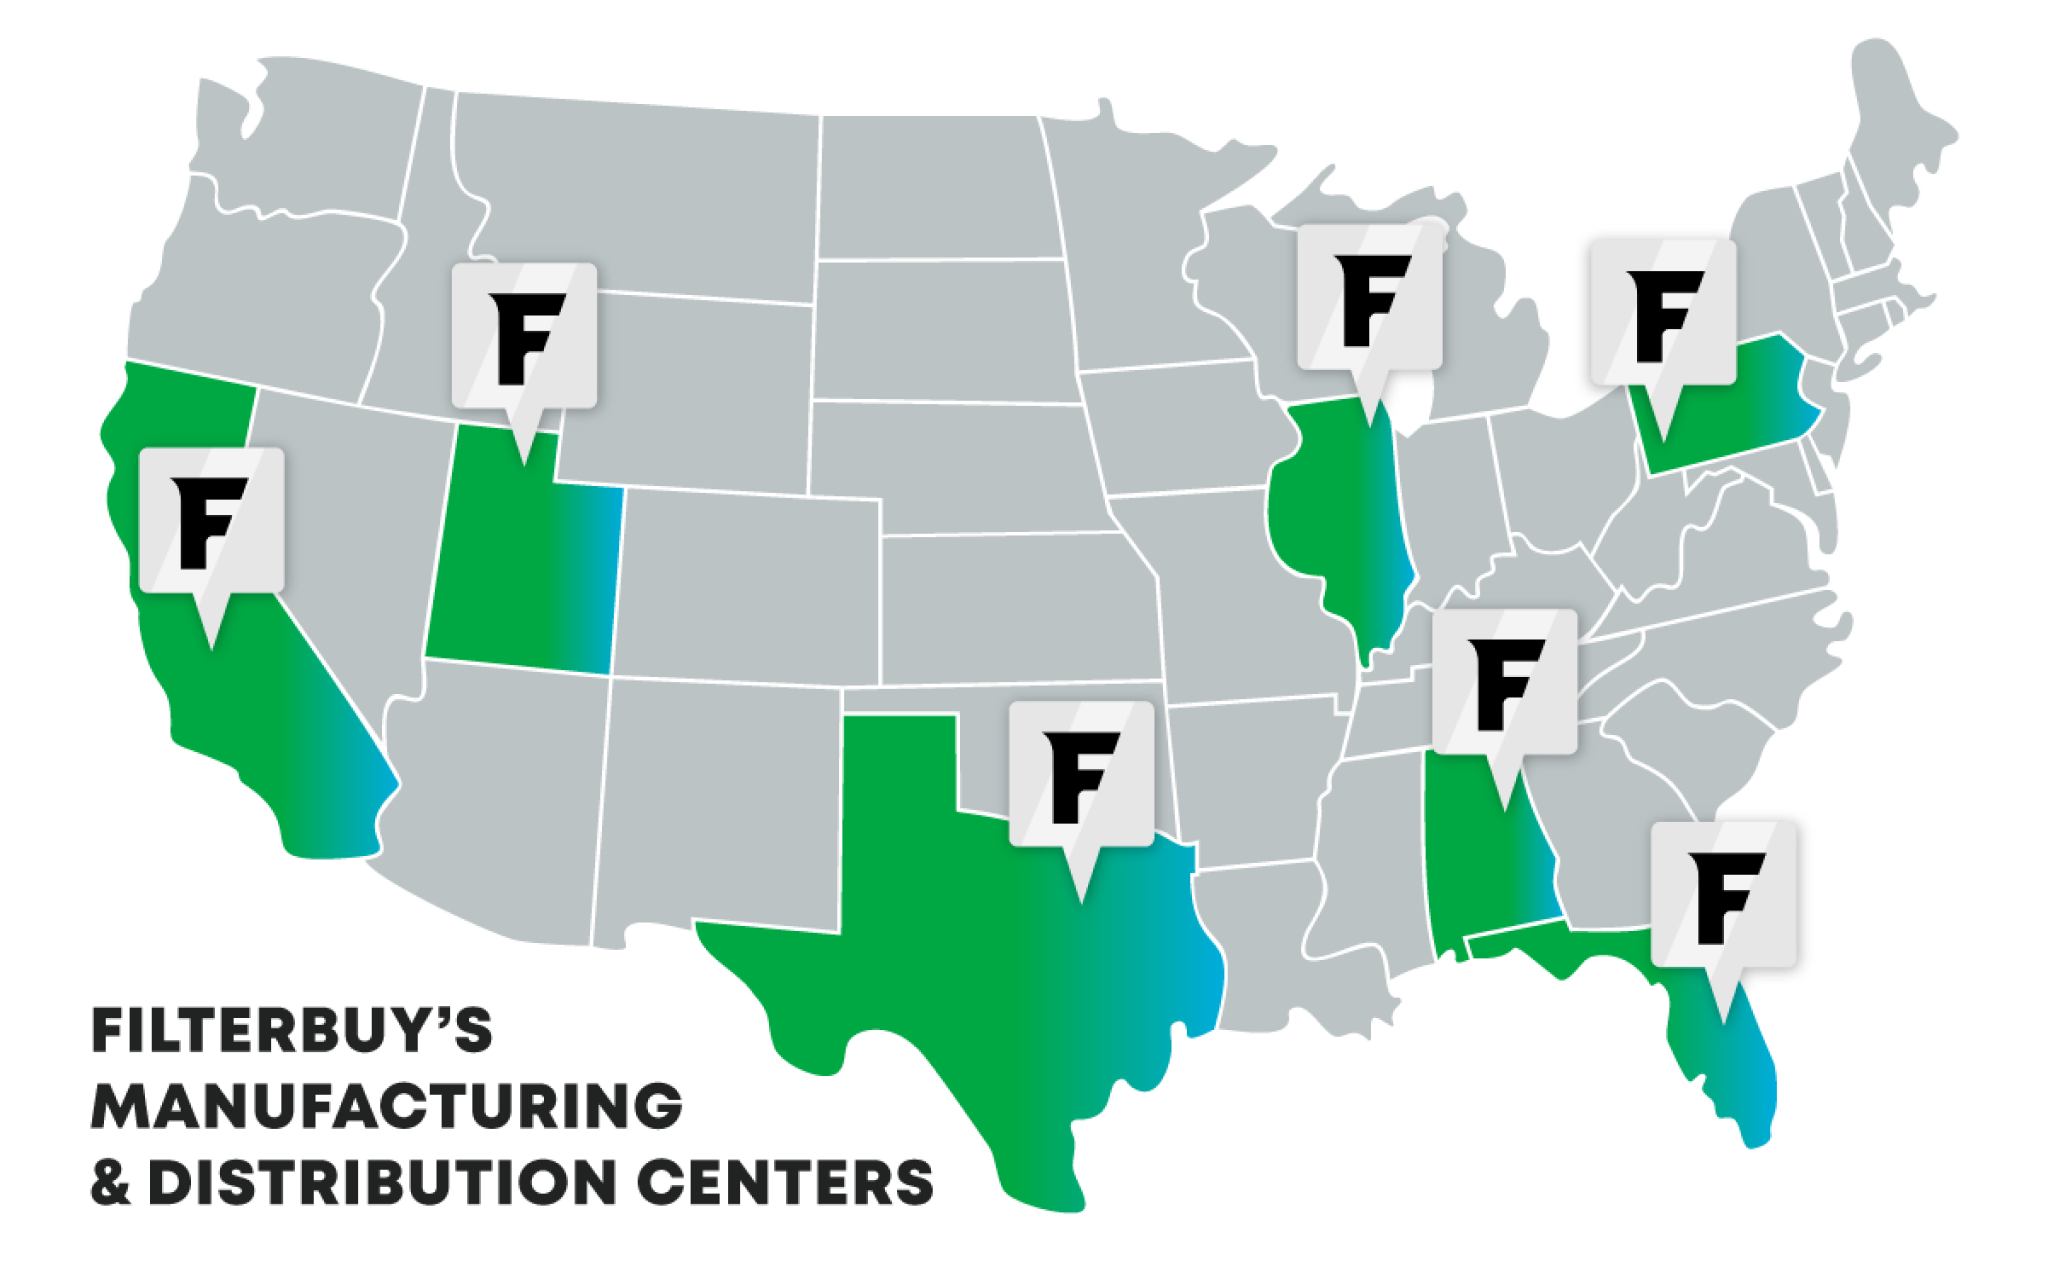 united states map with filterbuy manufacturing and distribution centers